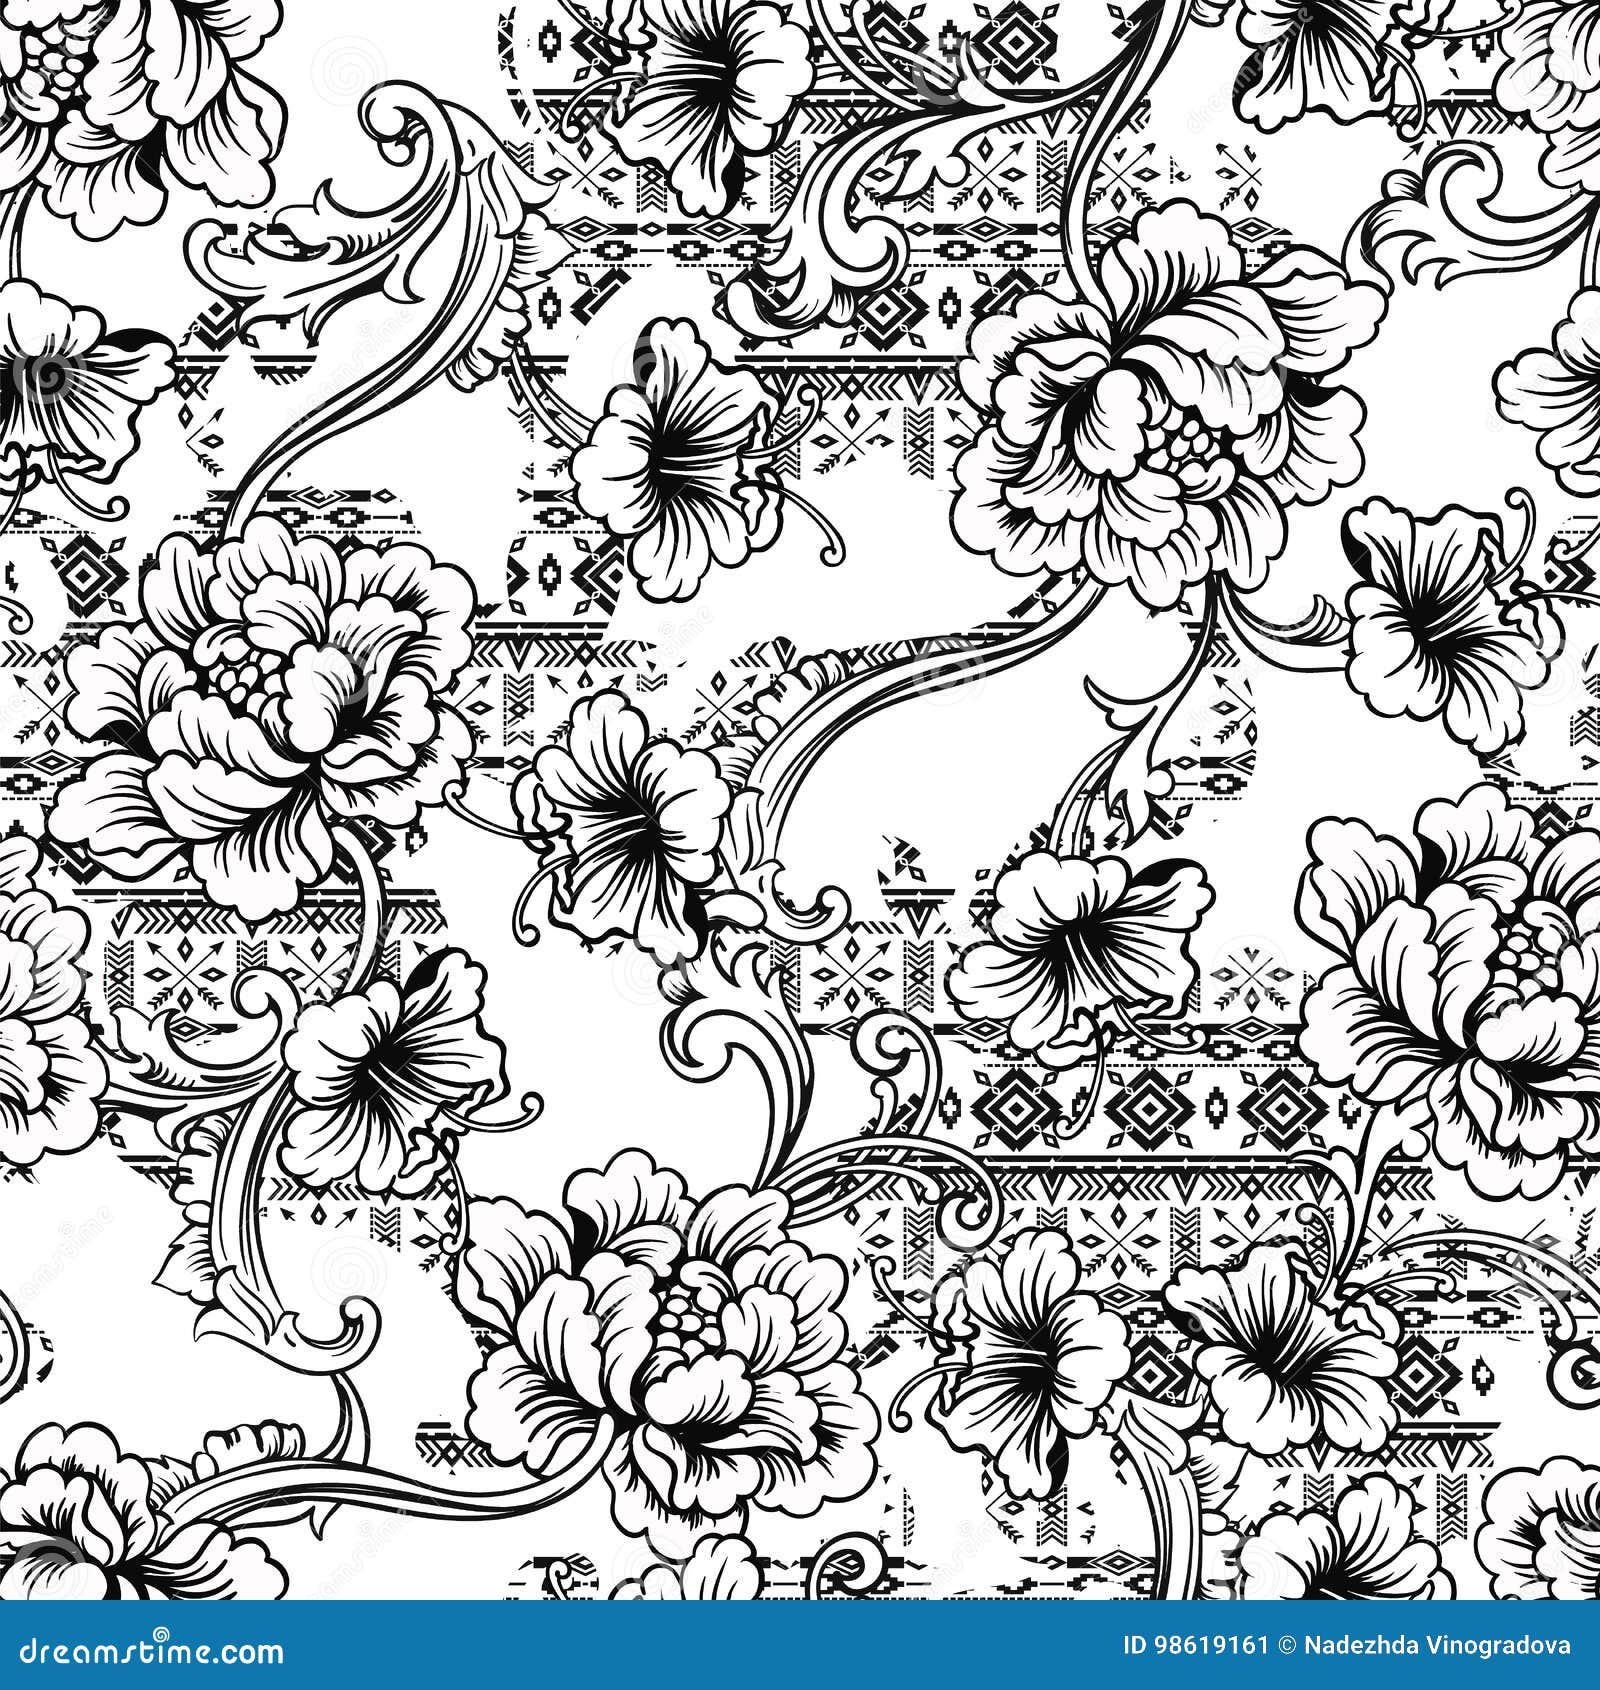 eclectic fabric seamless pattern. ethnic background with baroque ornament.